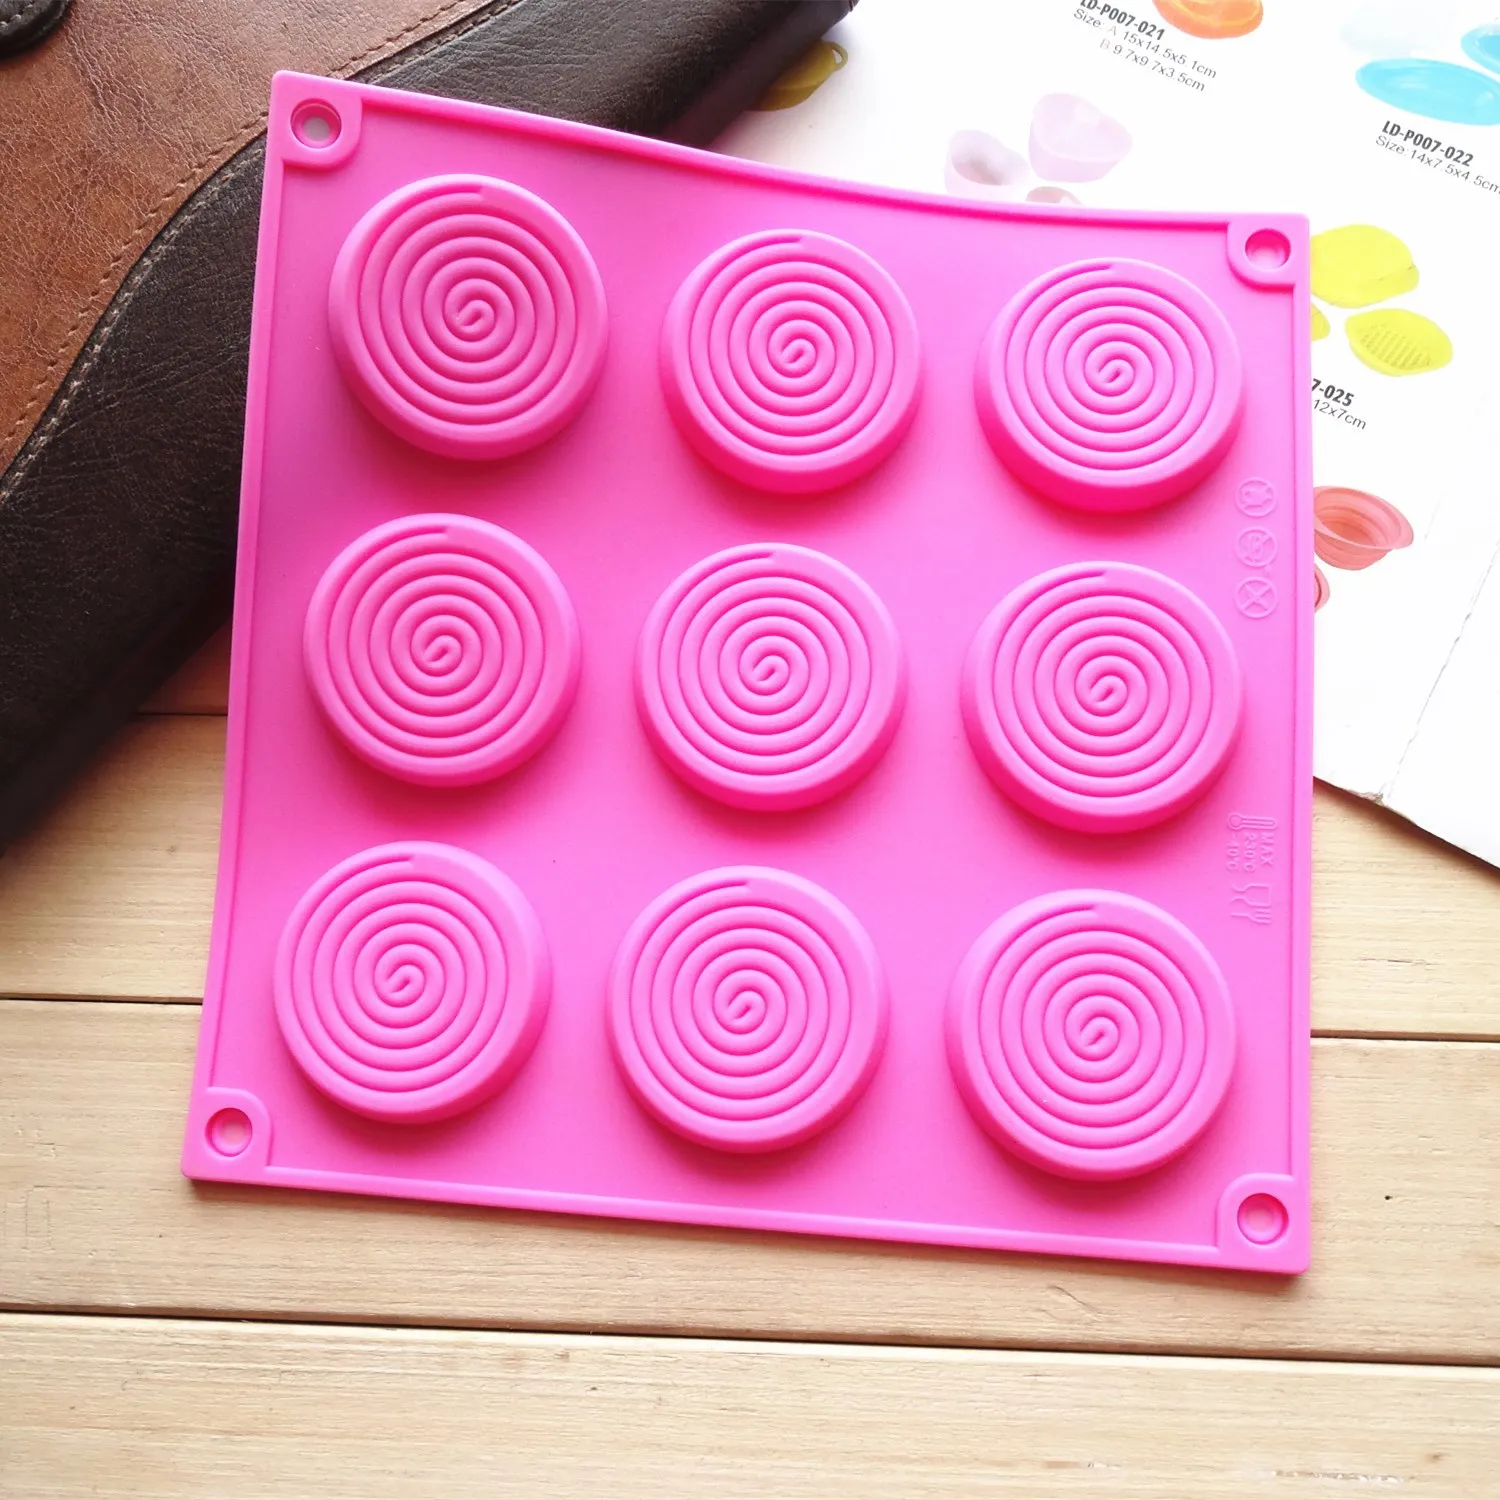 Cake Jelly Cookies Soap Mold Chocolate Baking Mould Tray IceCube Decorating US 